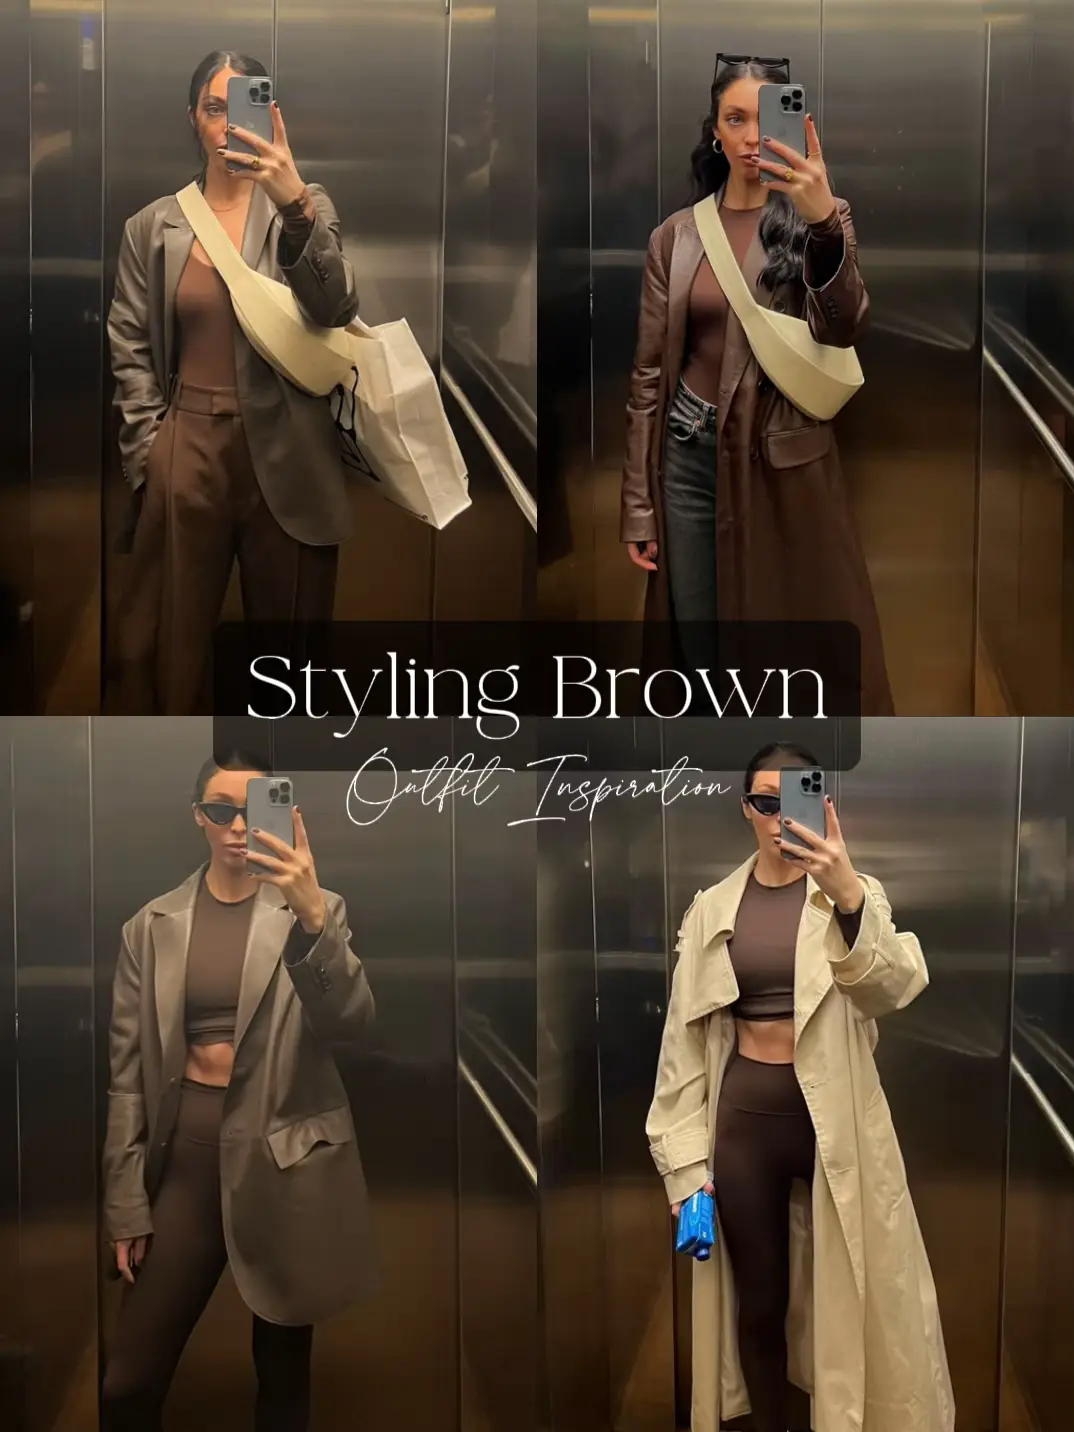 how to style black and brown leggings for fall 🤎